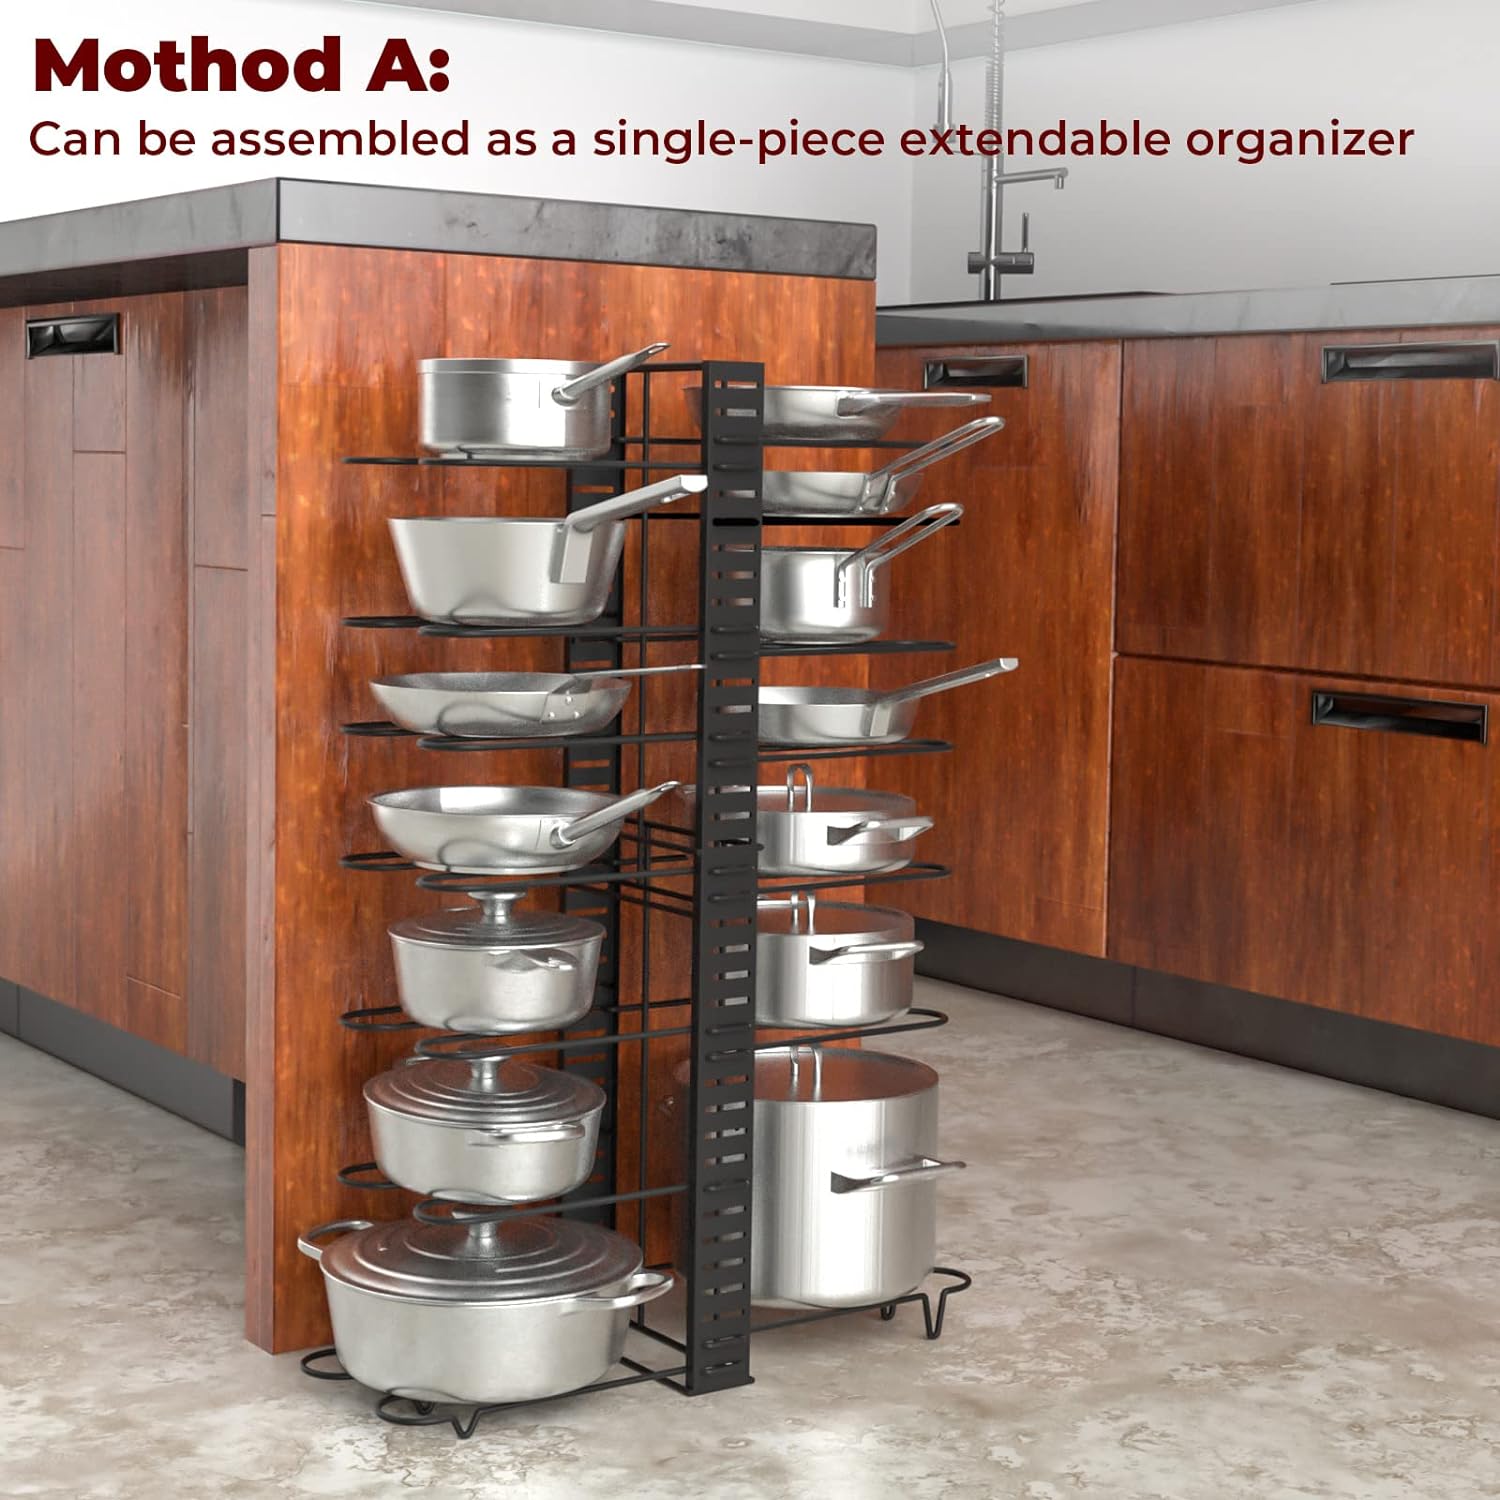 Vdomus Expandable Rack for Under Cabinet with 4 DIY Storage Positions - Pan Organizer Rack - Pull Out Cabinet with Adjustable Length - Pot Stacker Up to 13 Pans or Pot & Lids - Black Metal